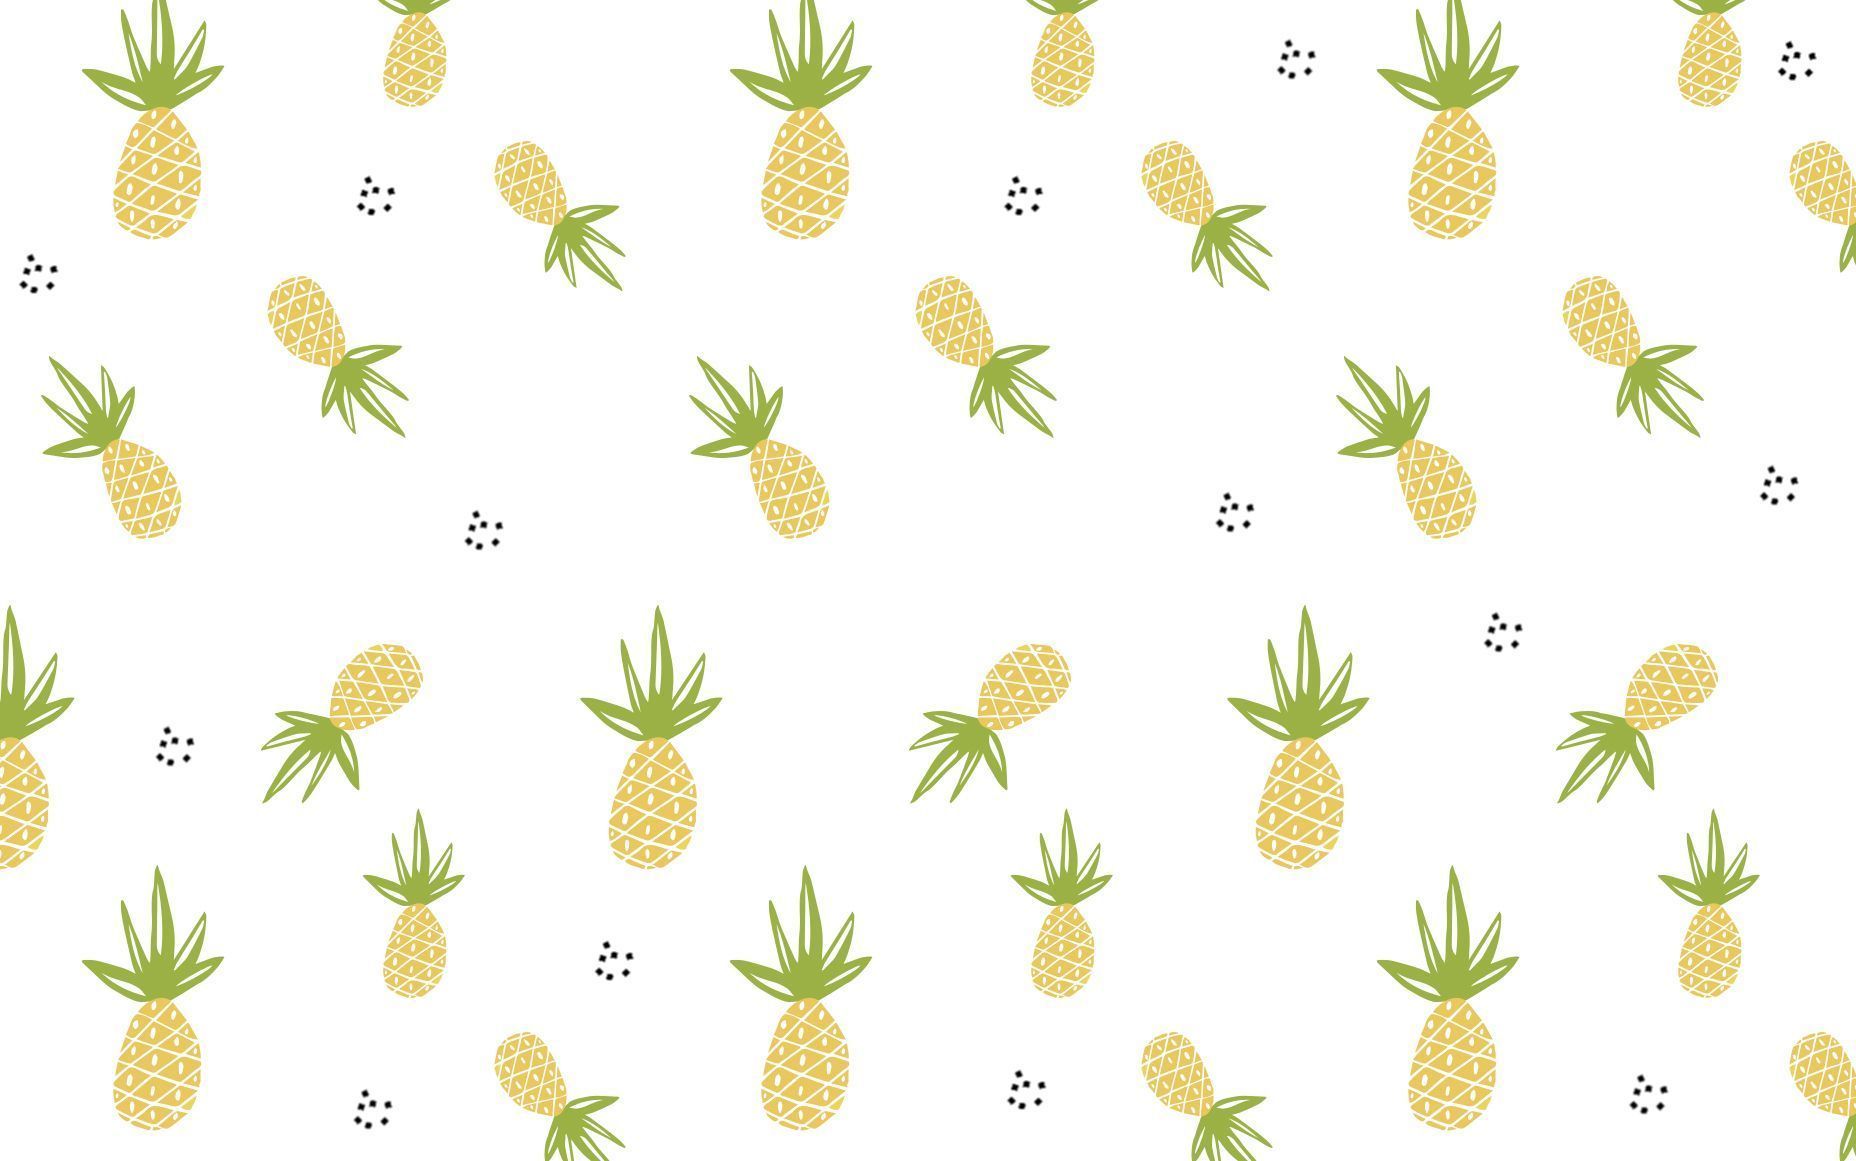 A pattern of pineapples and leaves - Chromebook, pineapple